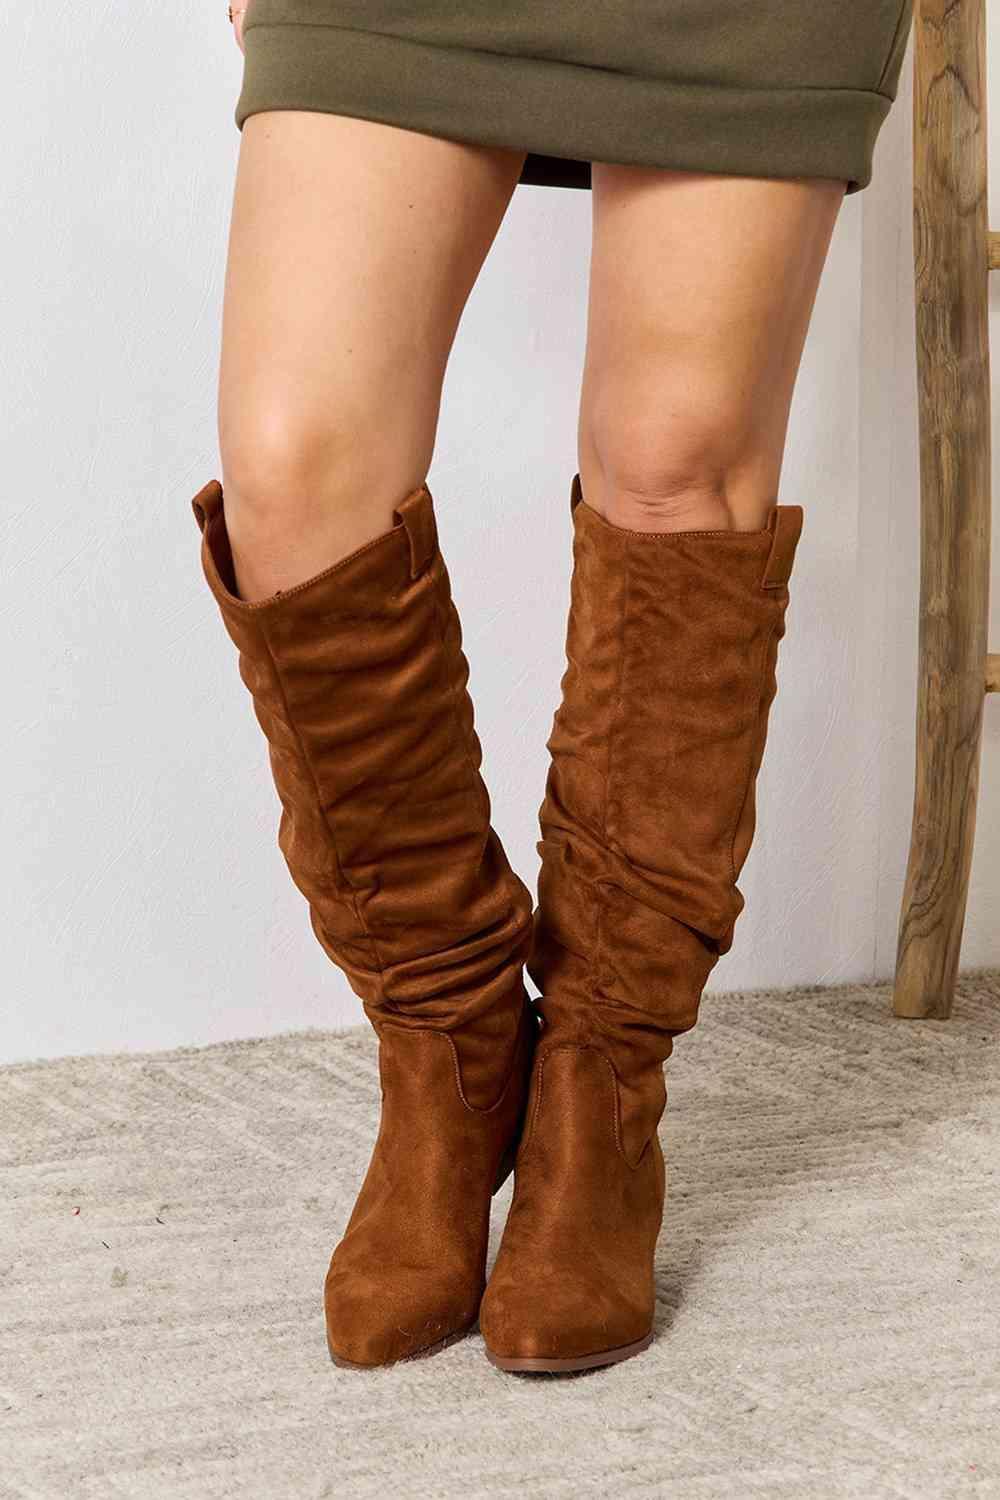 a close up of a person wearing brown boots